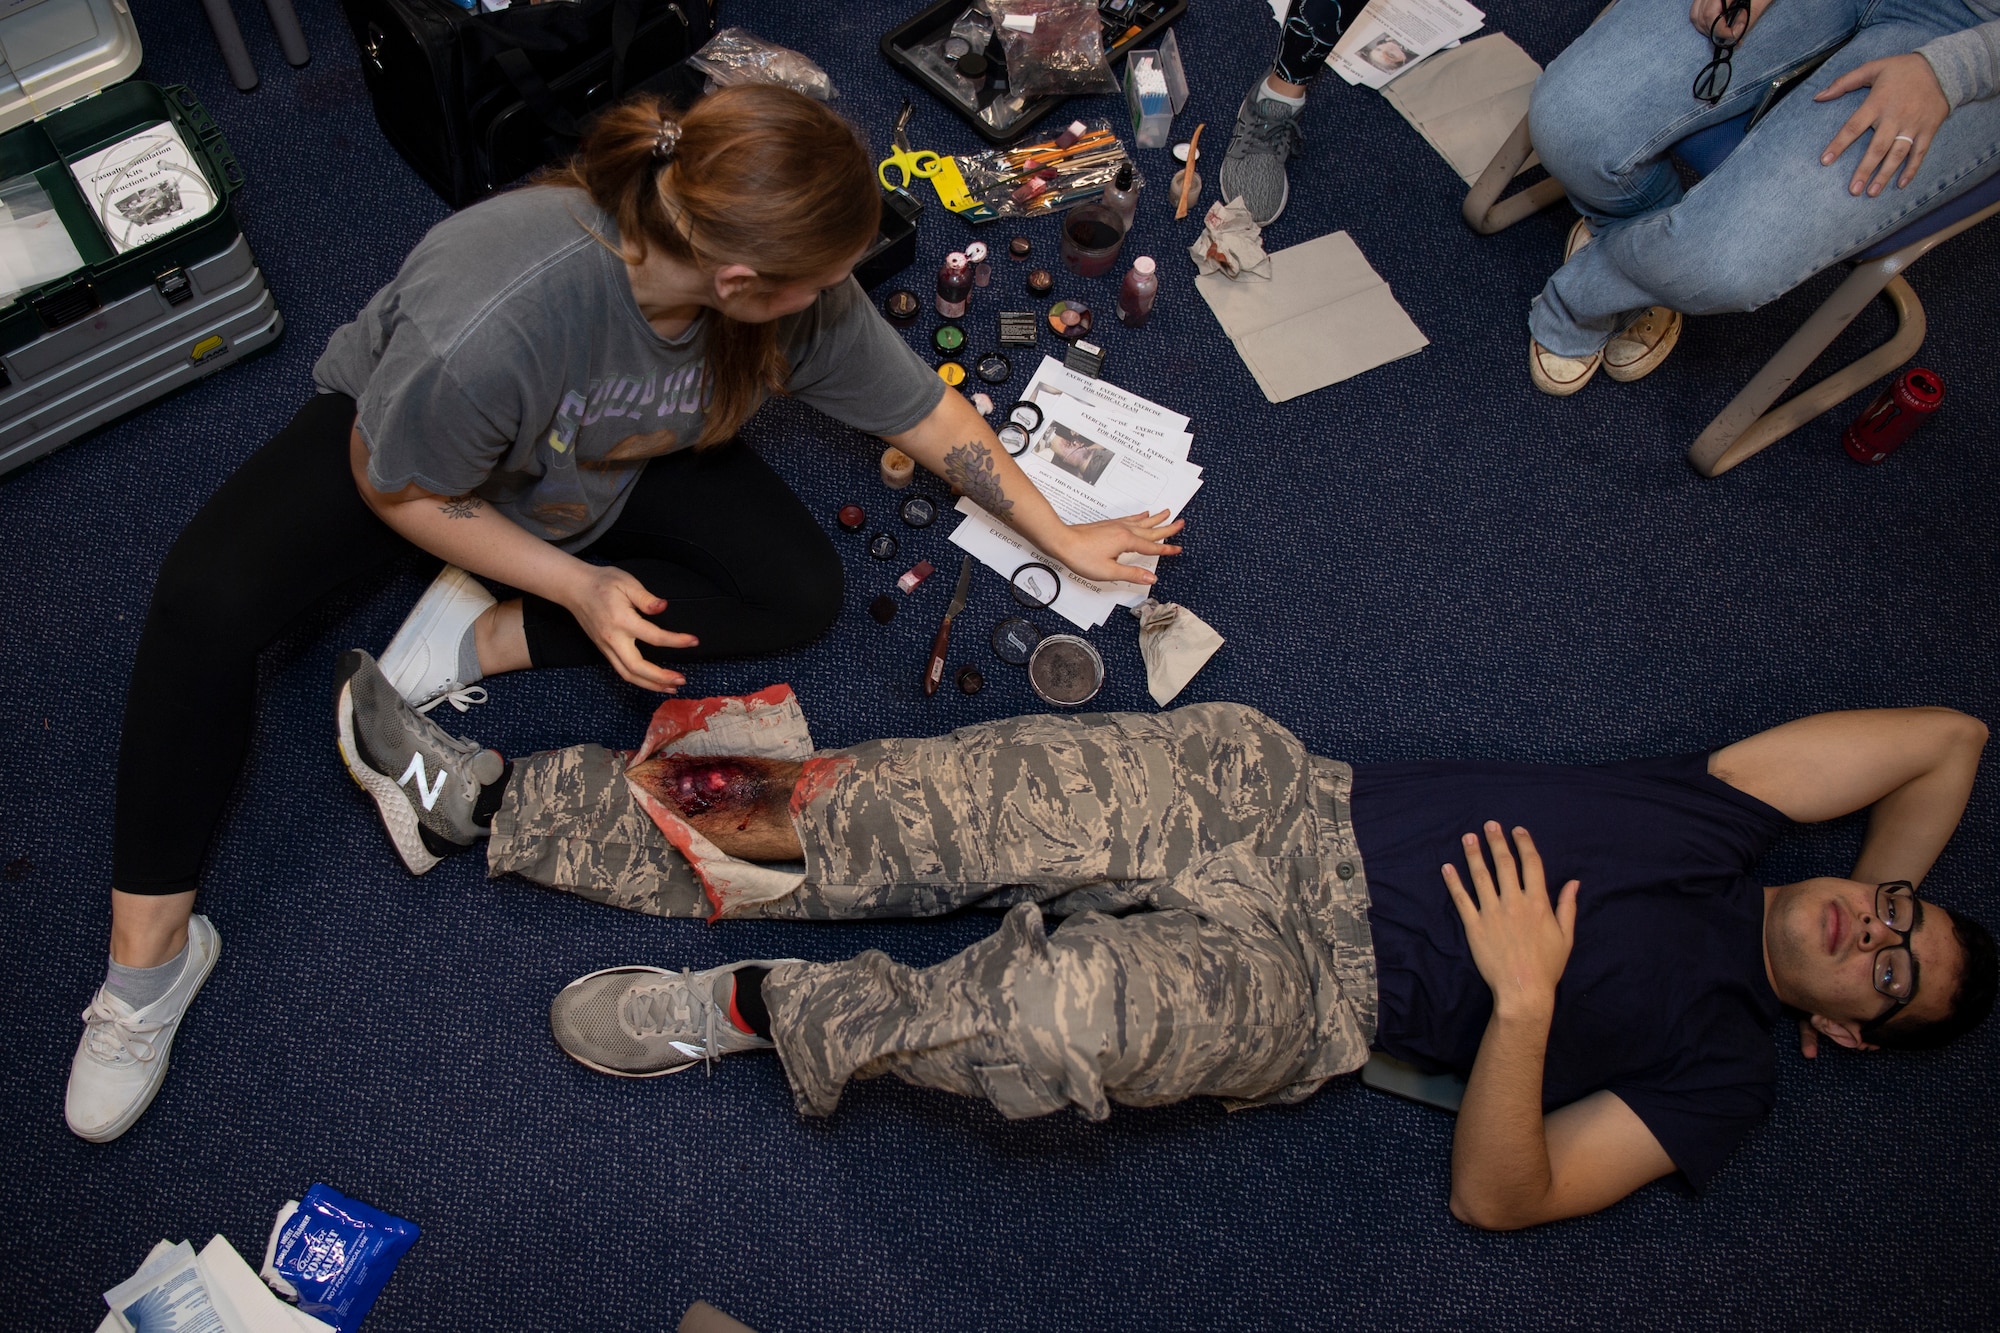 U.S. Air Force Senior Airman Alison Lewis, 52nd Medical Group public health technician, applies moulage to a simulated wounded victim’s leg during exercise Sabre Storm, Nov. 3, 2021, on Spangdahlem Air Base, Germany. During this simulated readiness exercise, the 52nd MDG was tested on mass casualty response, which consisted of 20 patients at once. (U.S. Air Force photo by Staff Sgt. Melody W. Howley)